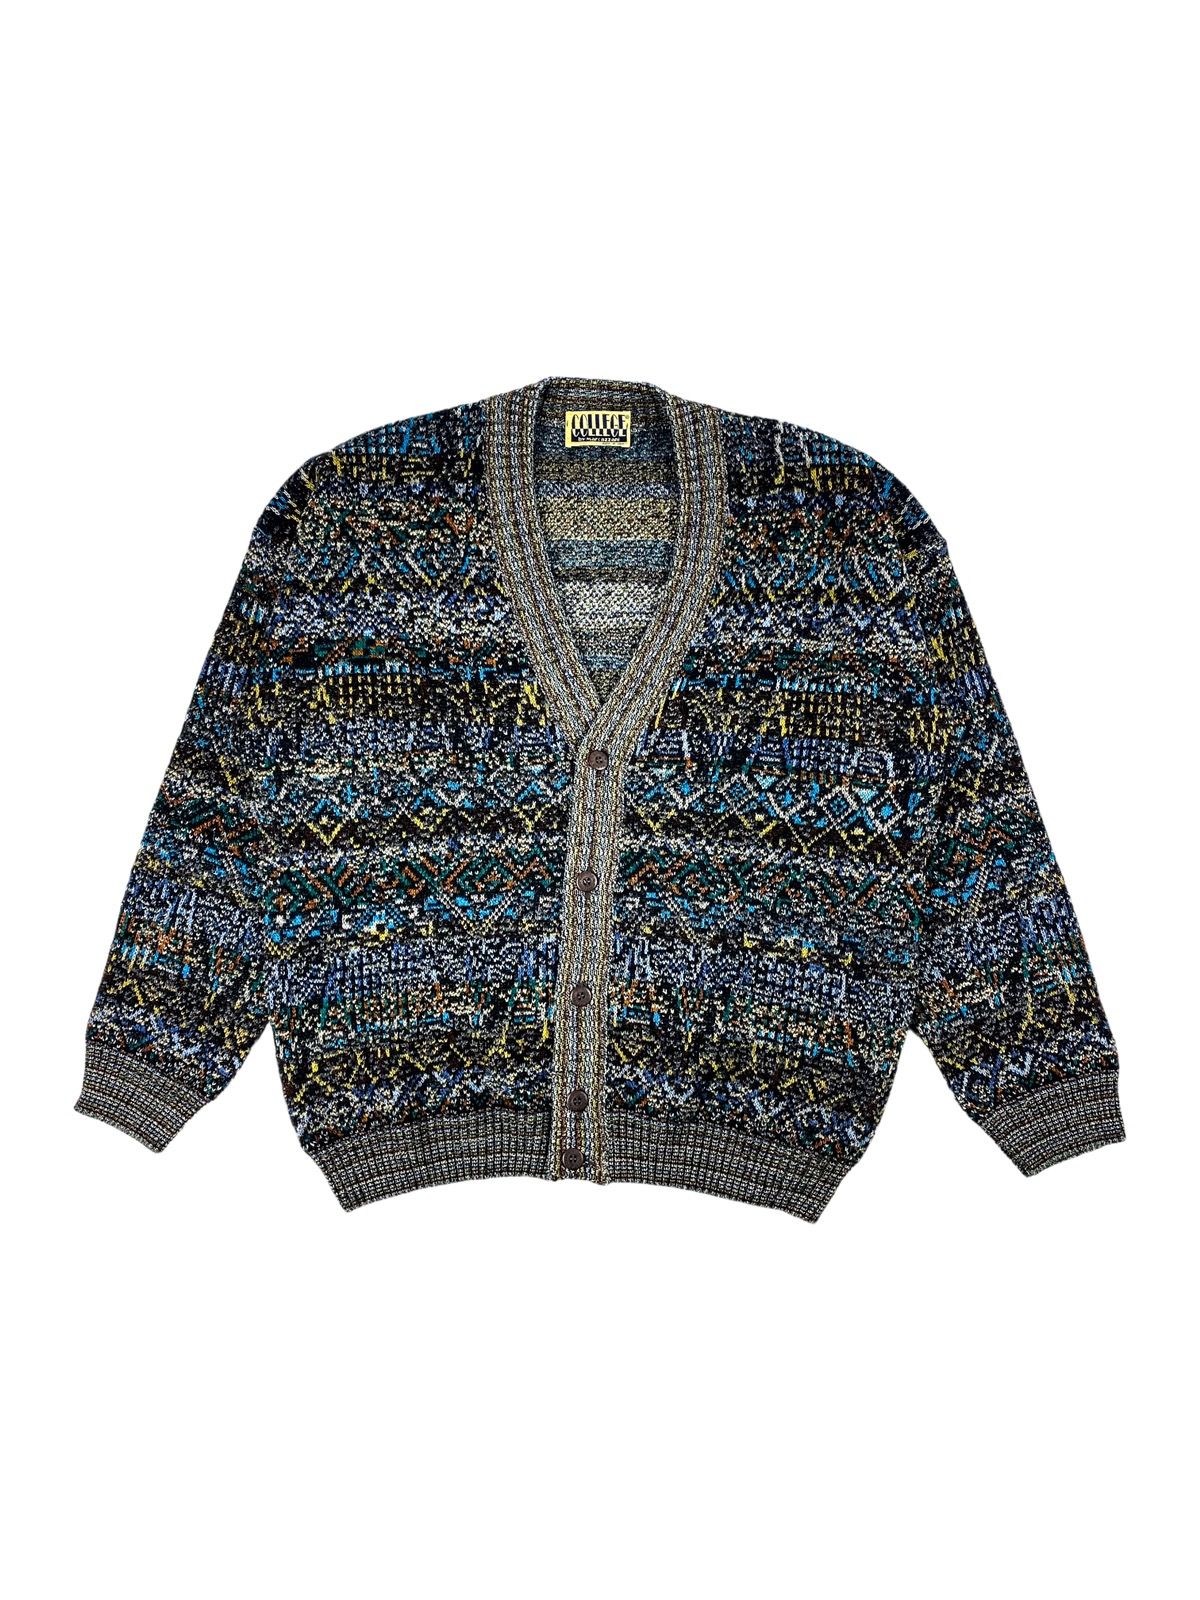 Pre-owned Coloured Cable Knit Sweater X Missoni Vintage Colored Knit College Cardigan Made In Multicolor